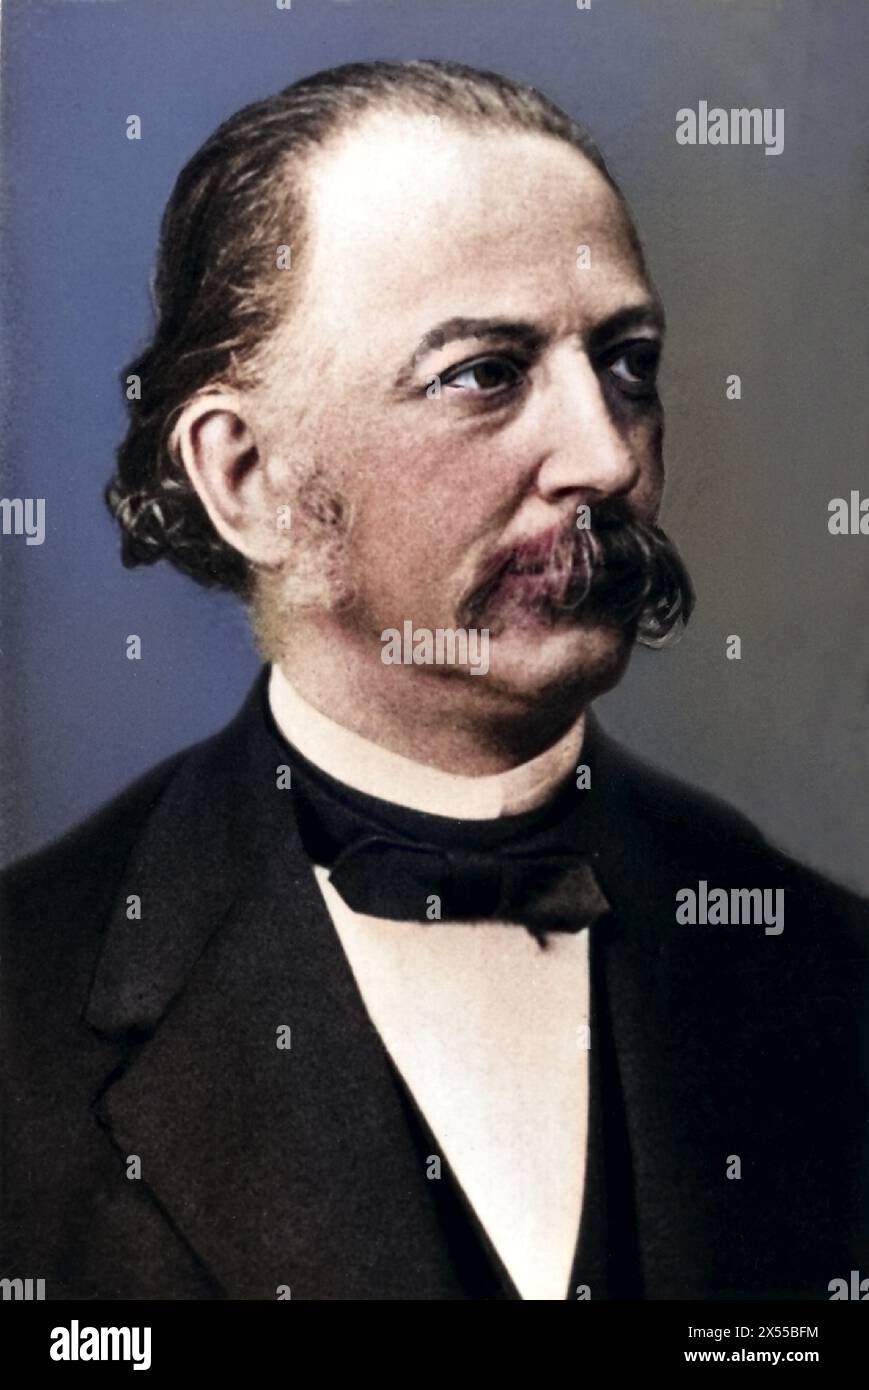 Fontane, Theodor, 30.12.1819 - 20.9.1898, German author / writer, poet, portrait, 19th century, ADDITIONAL-RIGHTS-CLEARANCE-INFO-NOT-AVAILABLE Stock Photo